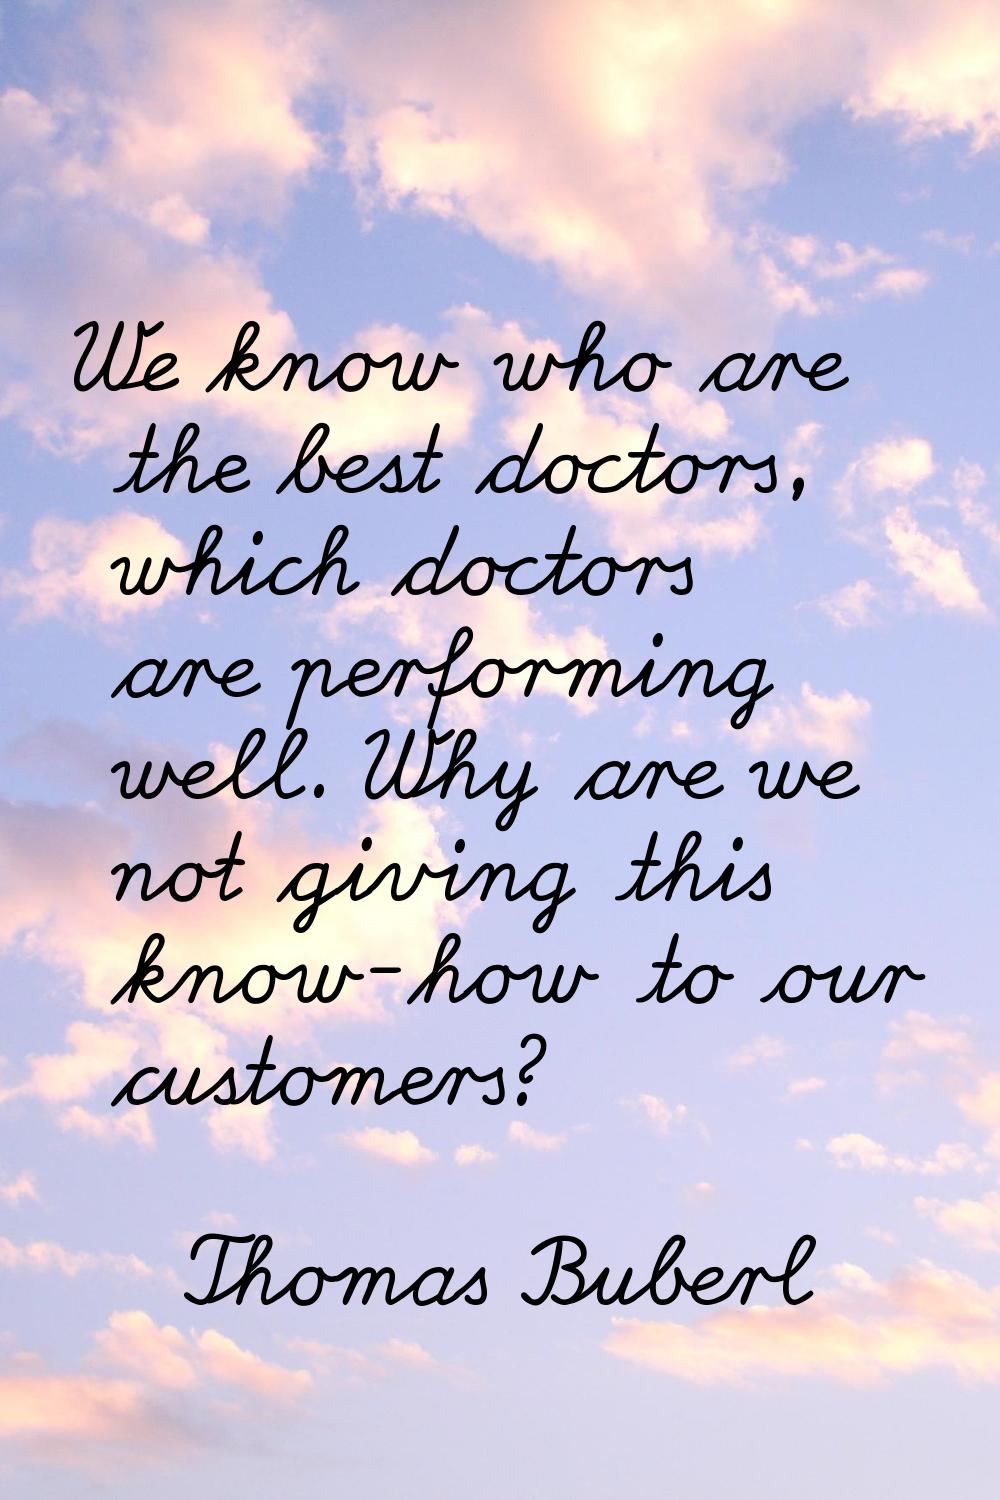 We know who are the best doctors, which doctors are performing well. Why are we not giving this kno